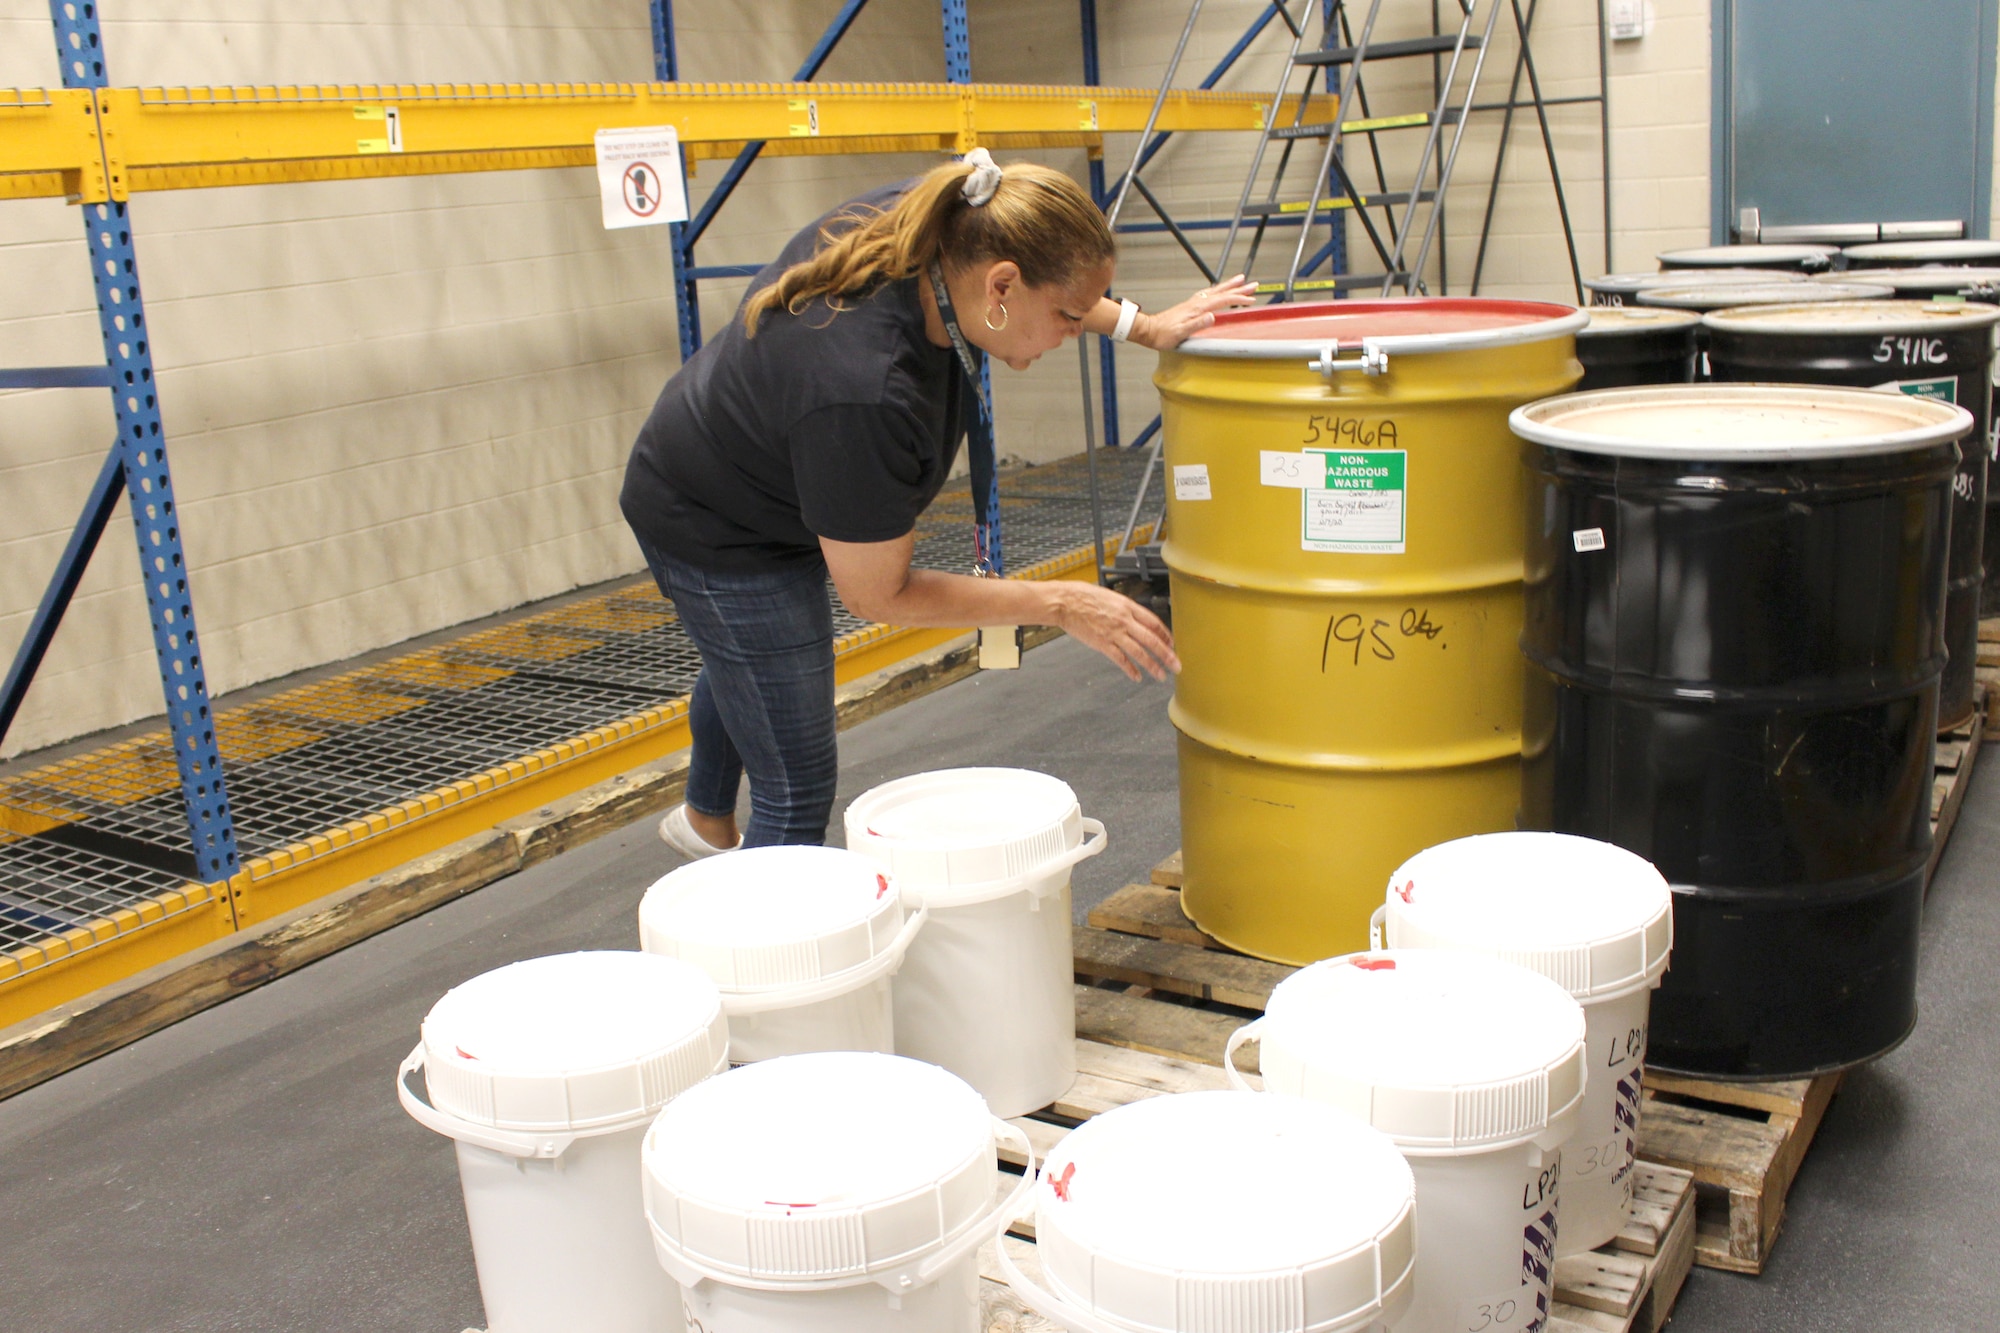 Christina Norman with the Environmental and Hazardous Waste Operations Group at Arnold Air Force Base, Tenn., checks the label of one of the barrels in the hazardous waste storage facility prior to it being loaded on a truck and taken to the disposal site on June 15, 2021. The Hazardous Waste Program at Arnold manages the generation, handling, treatment and disposal of wastes posing characteristics known to be hazardous to human health or the environment. (U.S. Air Force photo)